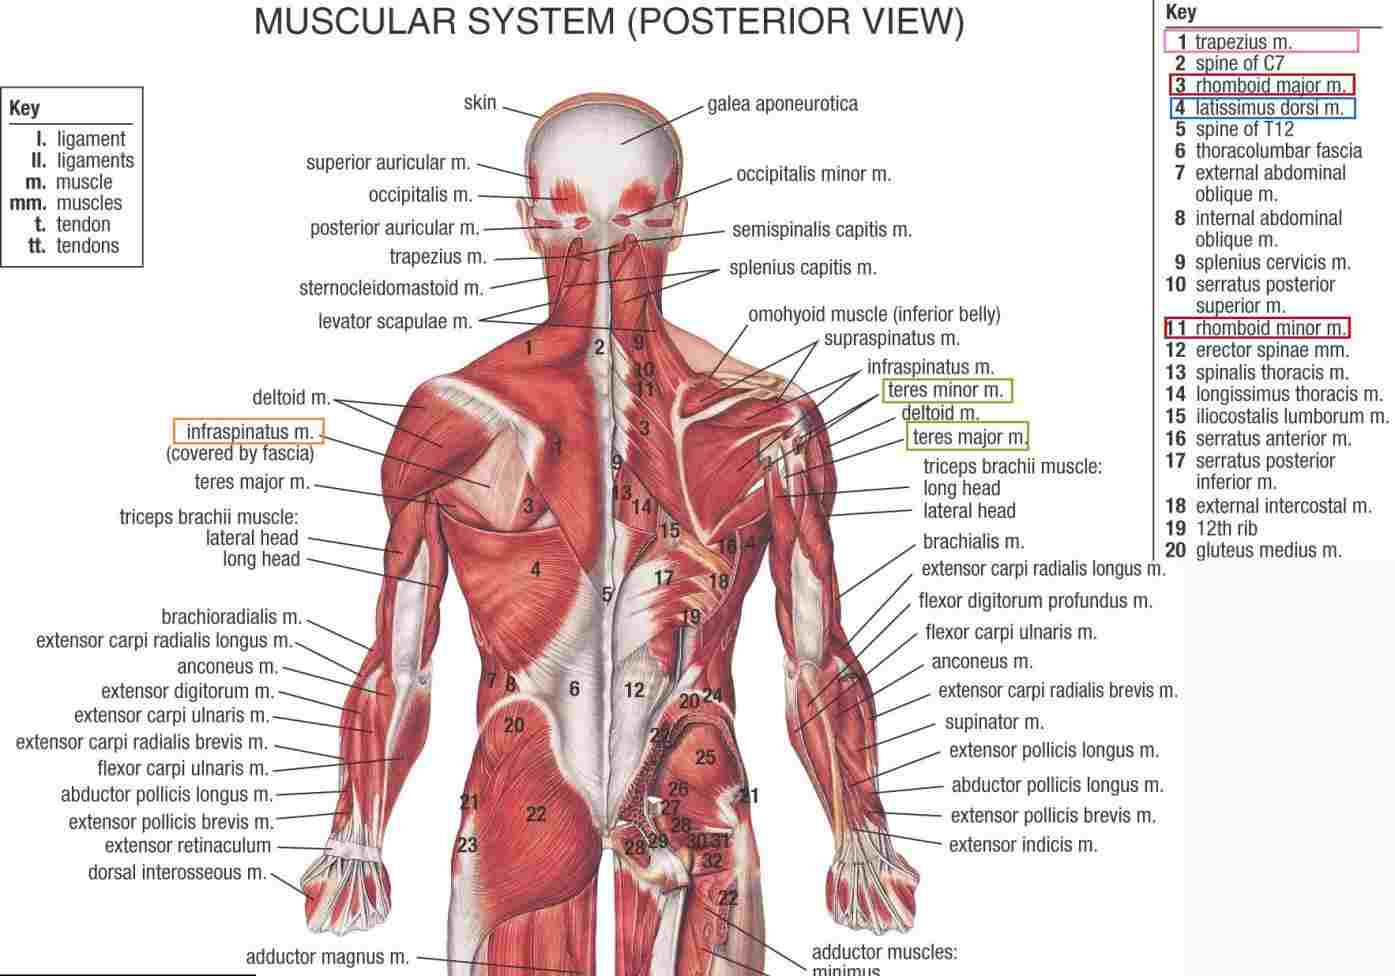 Muscular System Diagram Hb Human Muscle Anatomy Hip Diagram Muscular System Posterior View